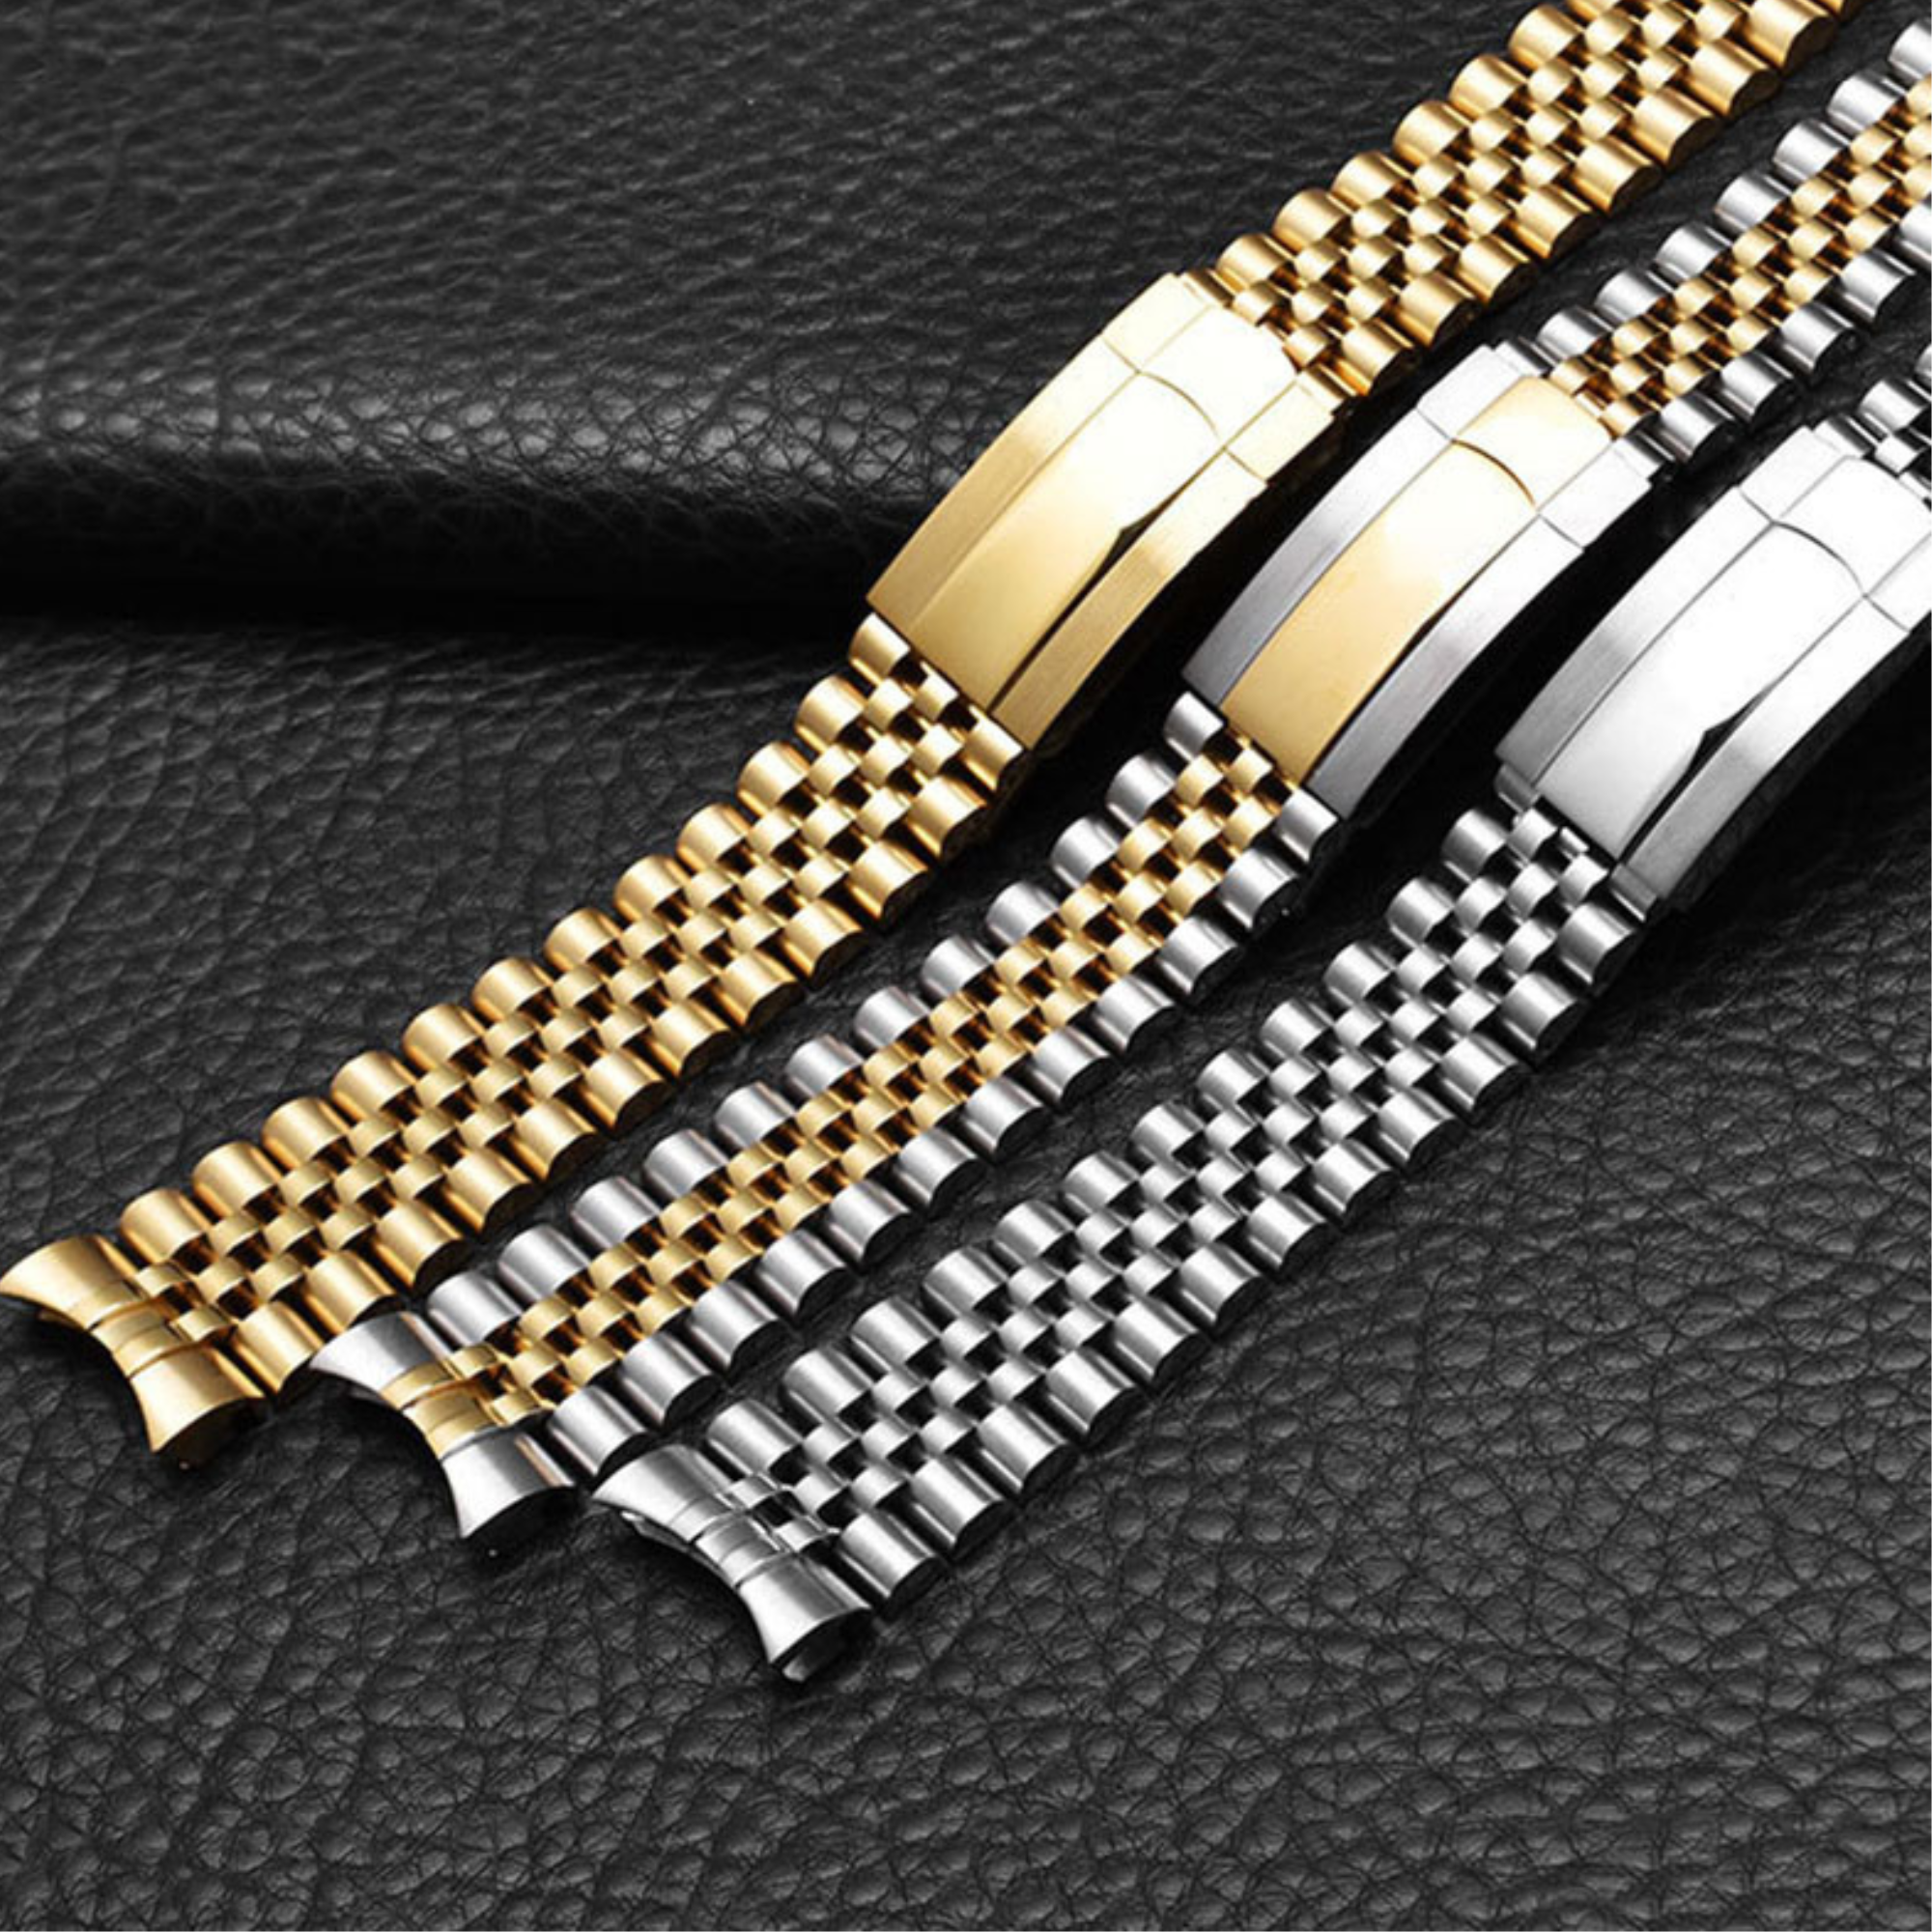 10 watch bracelets that are magnificent works of jewellery art